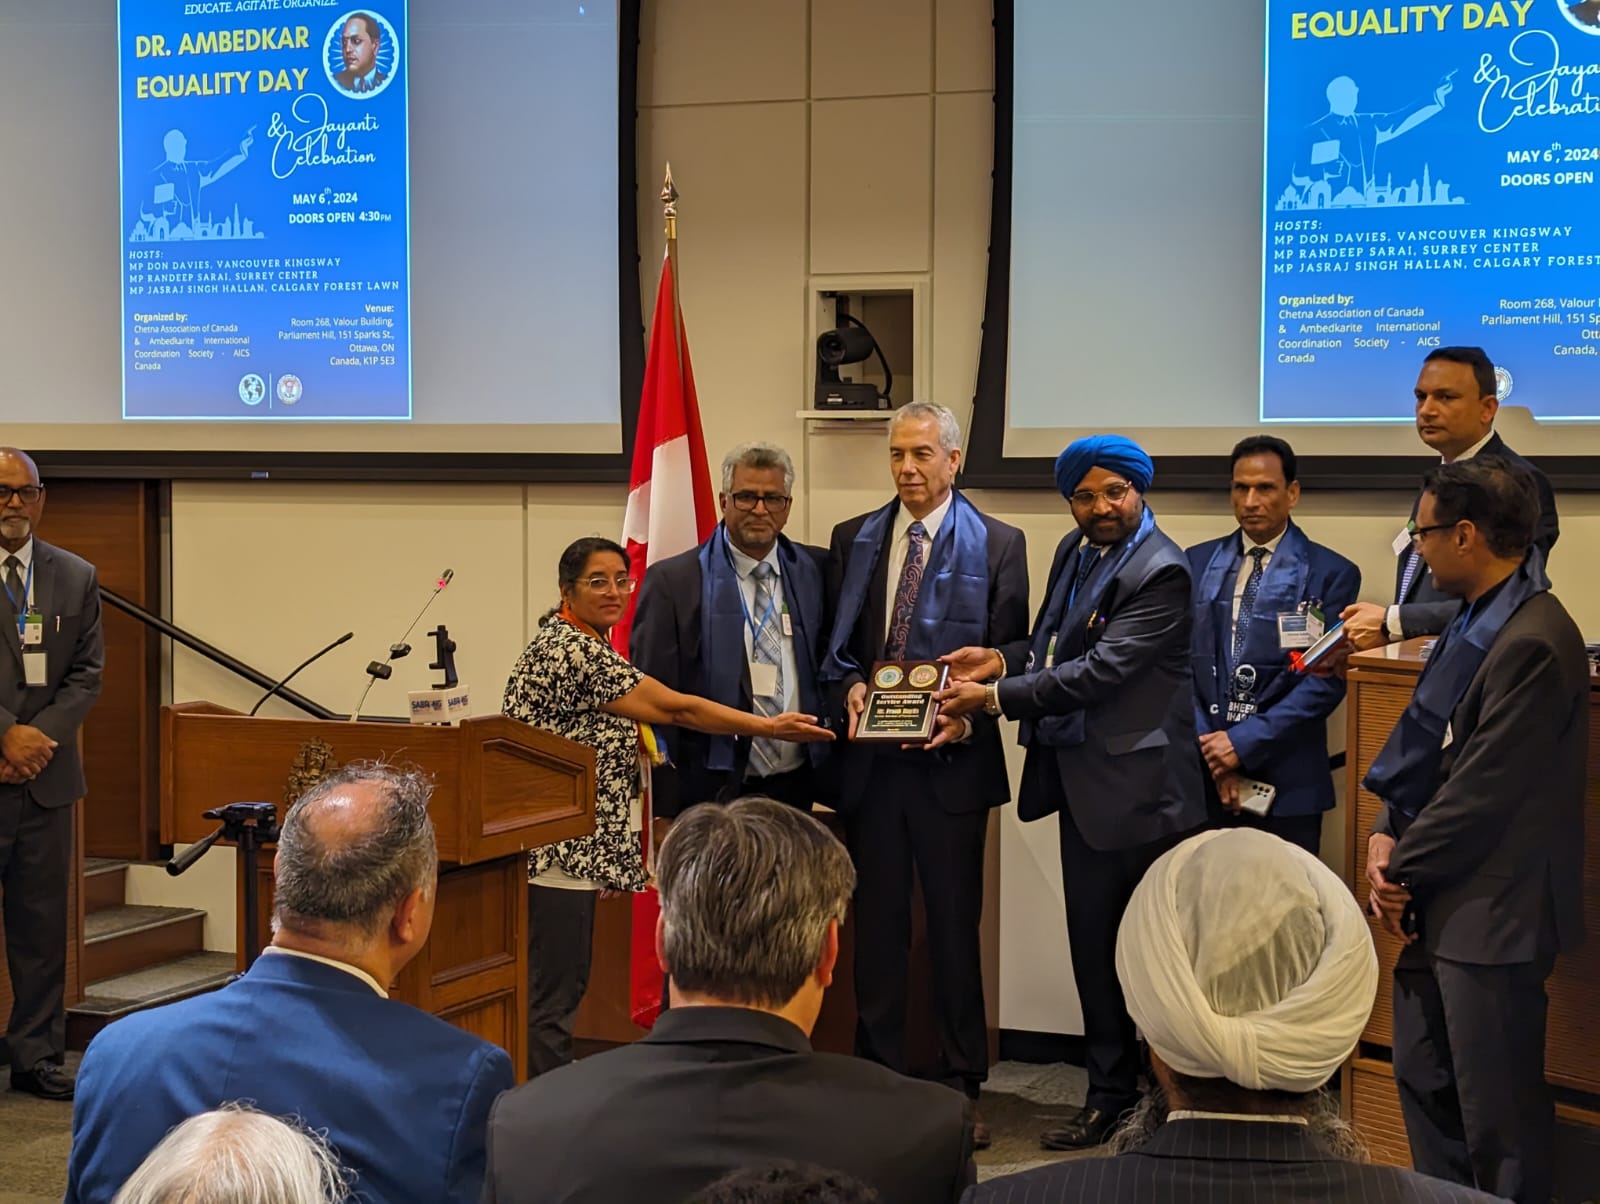 Dr. Ambedkar Equality Day Celebrations Held At the Parliament Hill